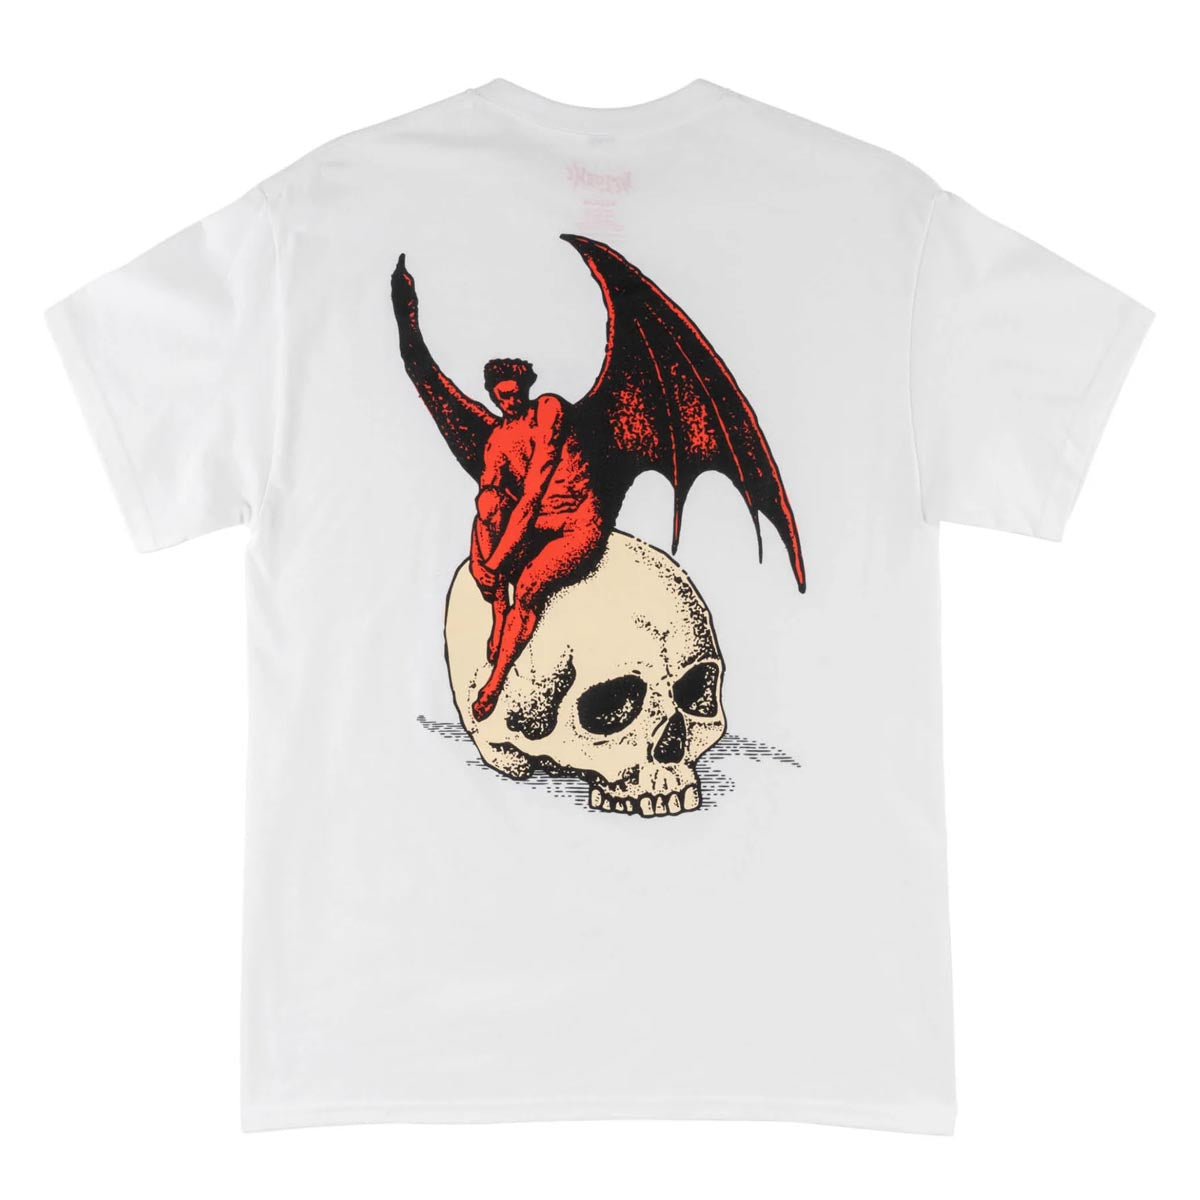 Welcome Nephilim T-Shirt - White image 1